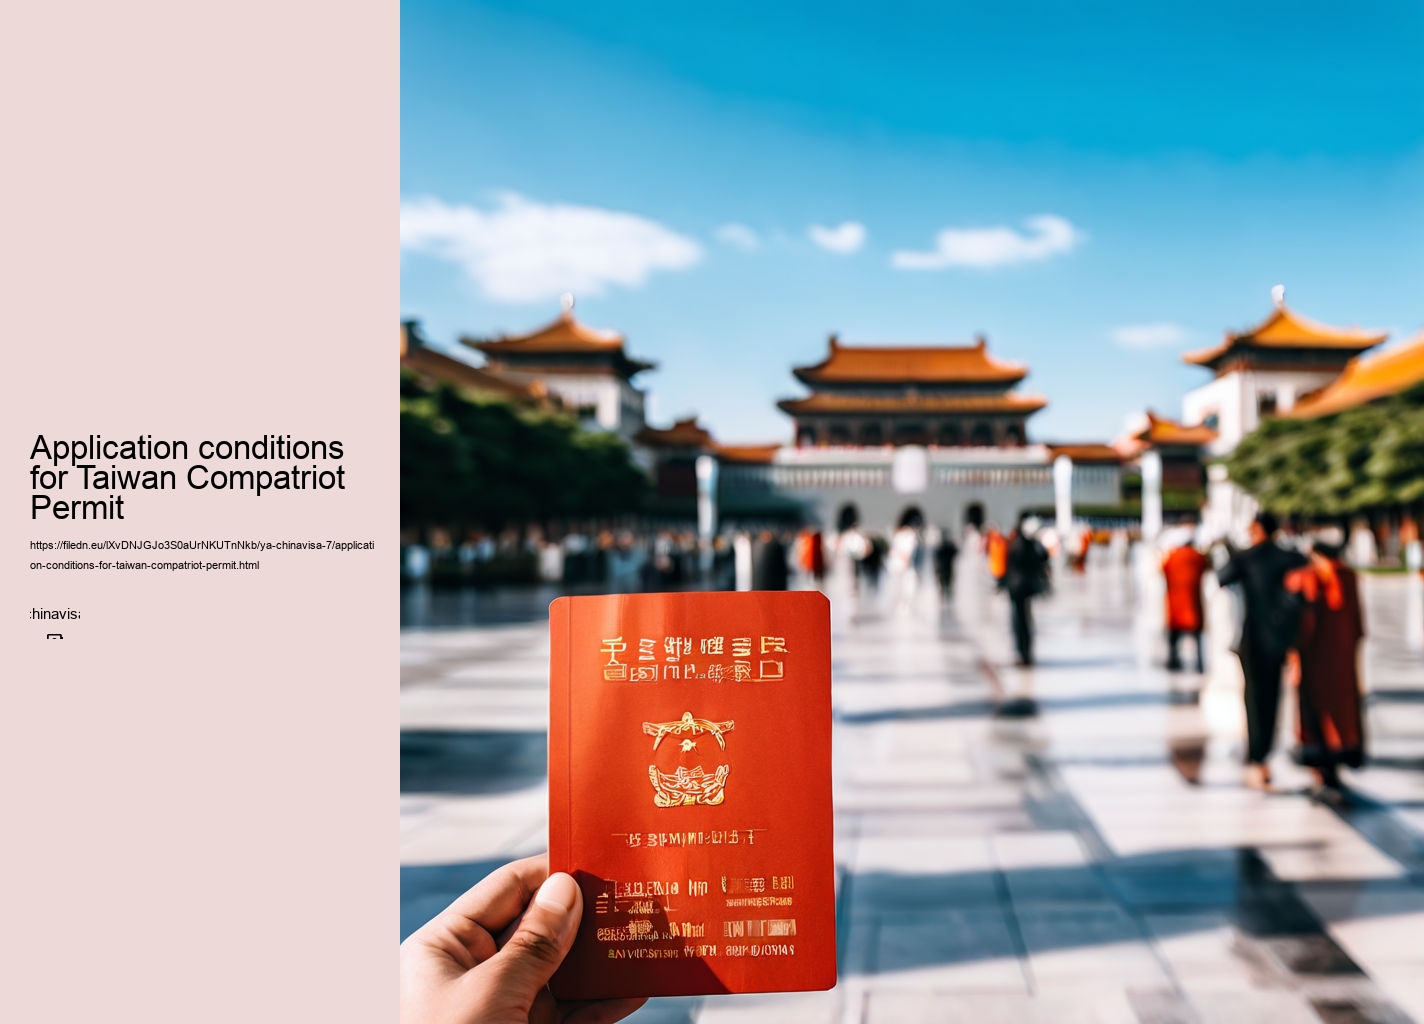 Application conditions for Taiwan Compatriot Permit